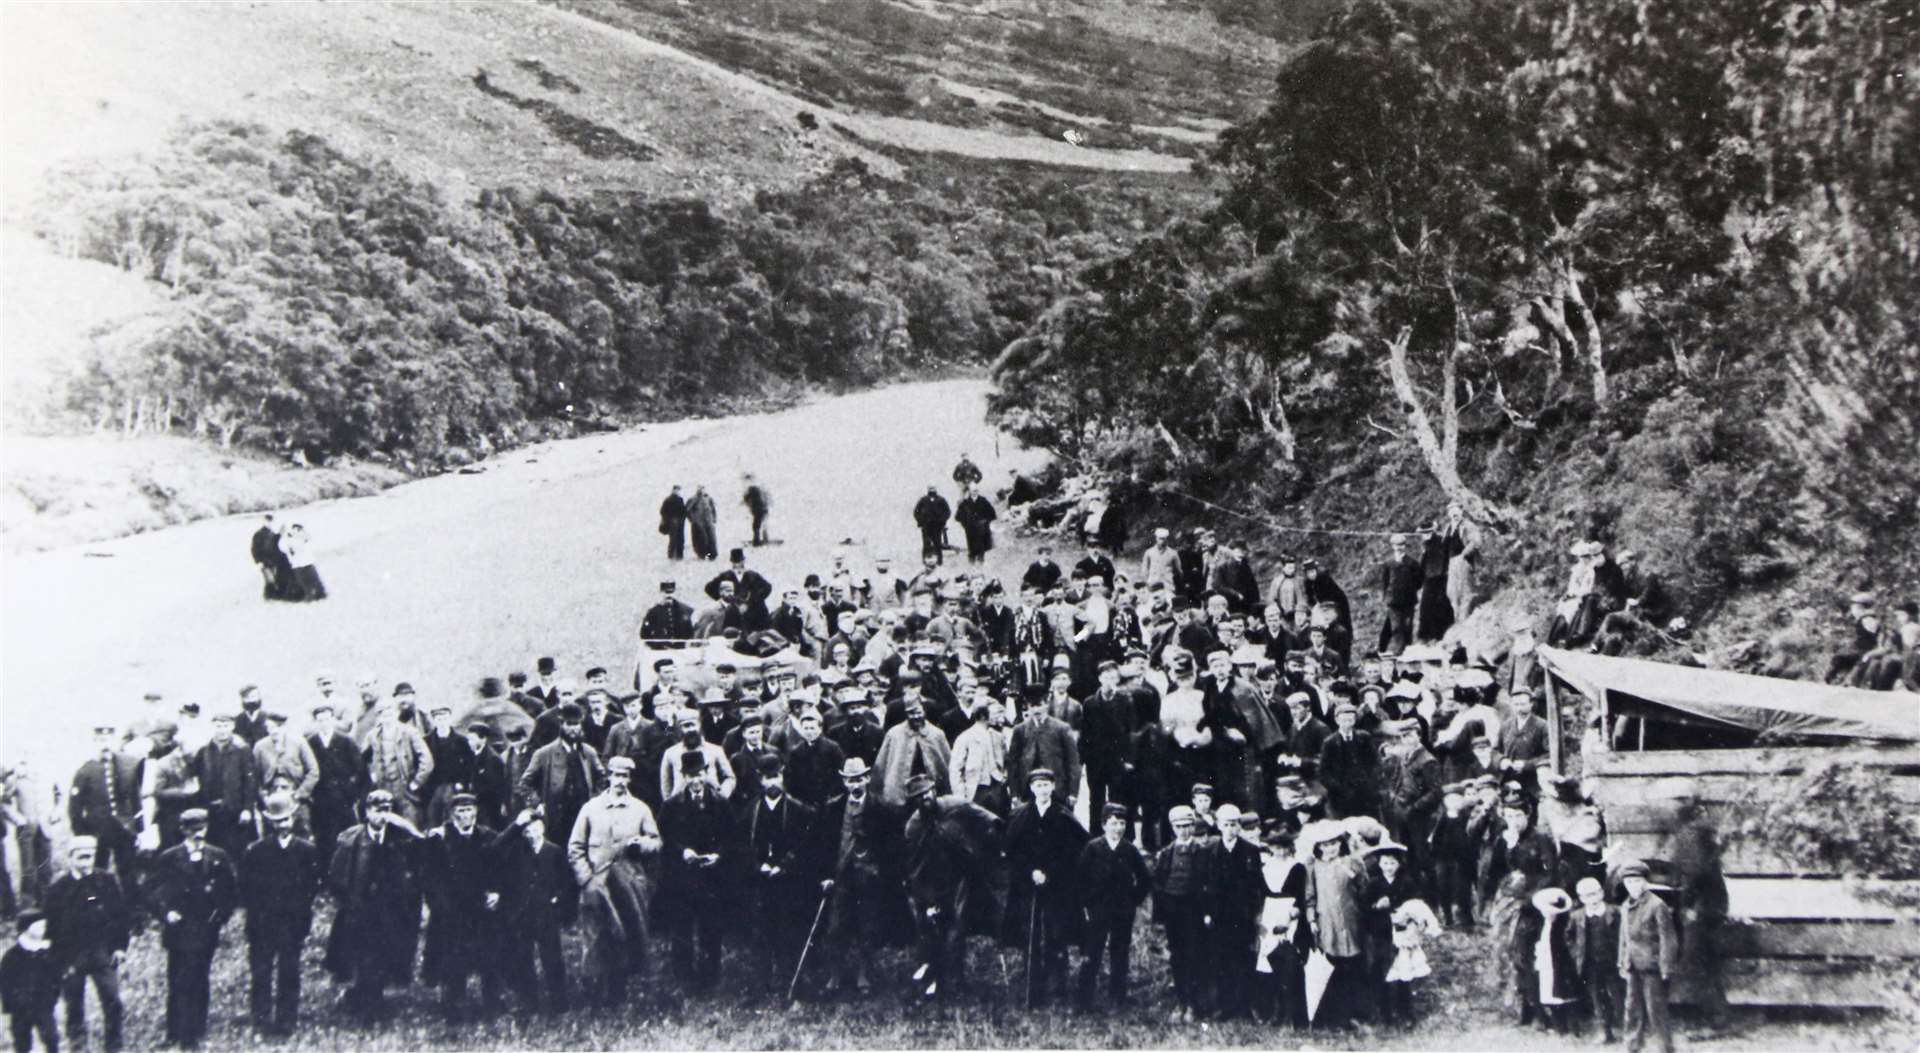 Locals gathered for the Cabrach picnic and games in the 1920s.